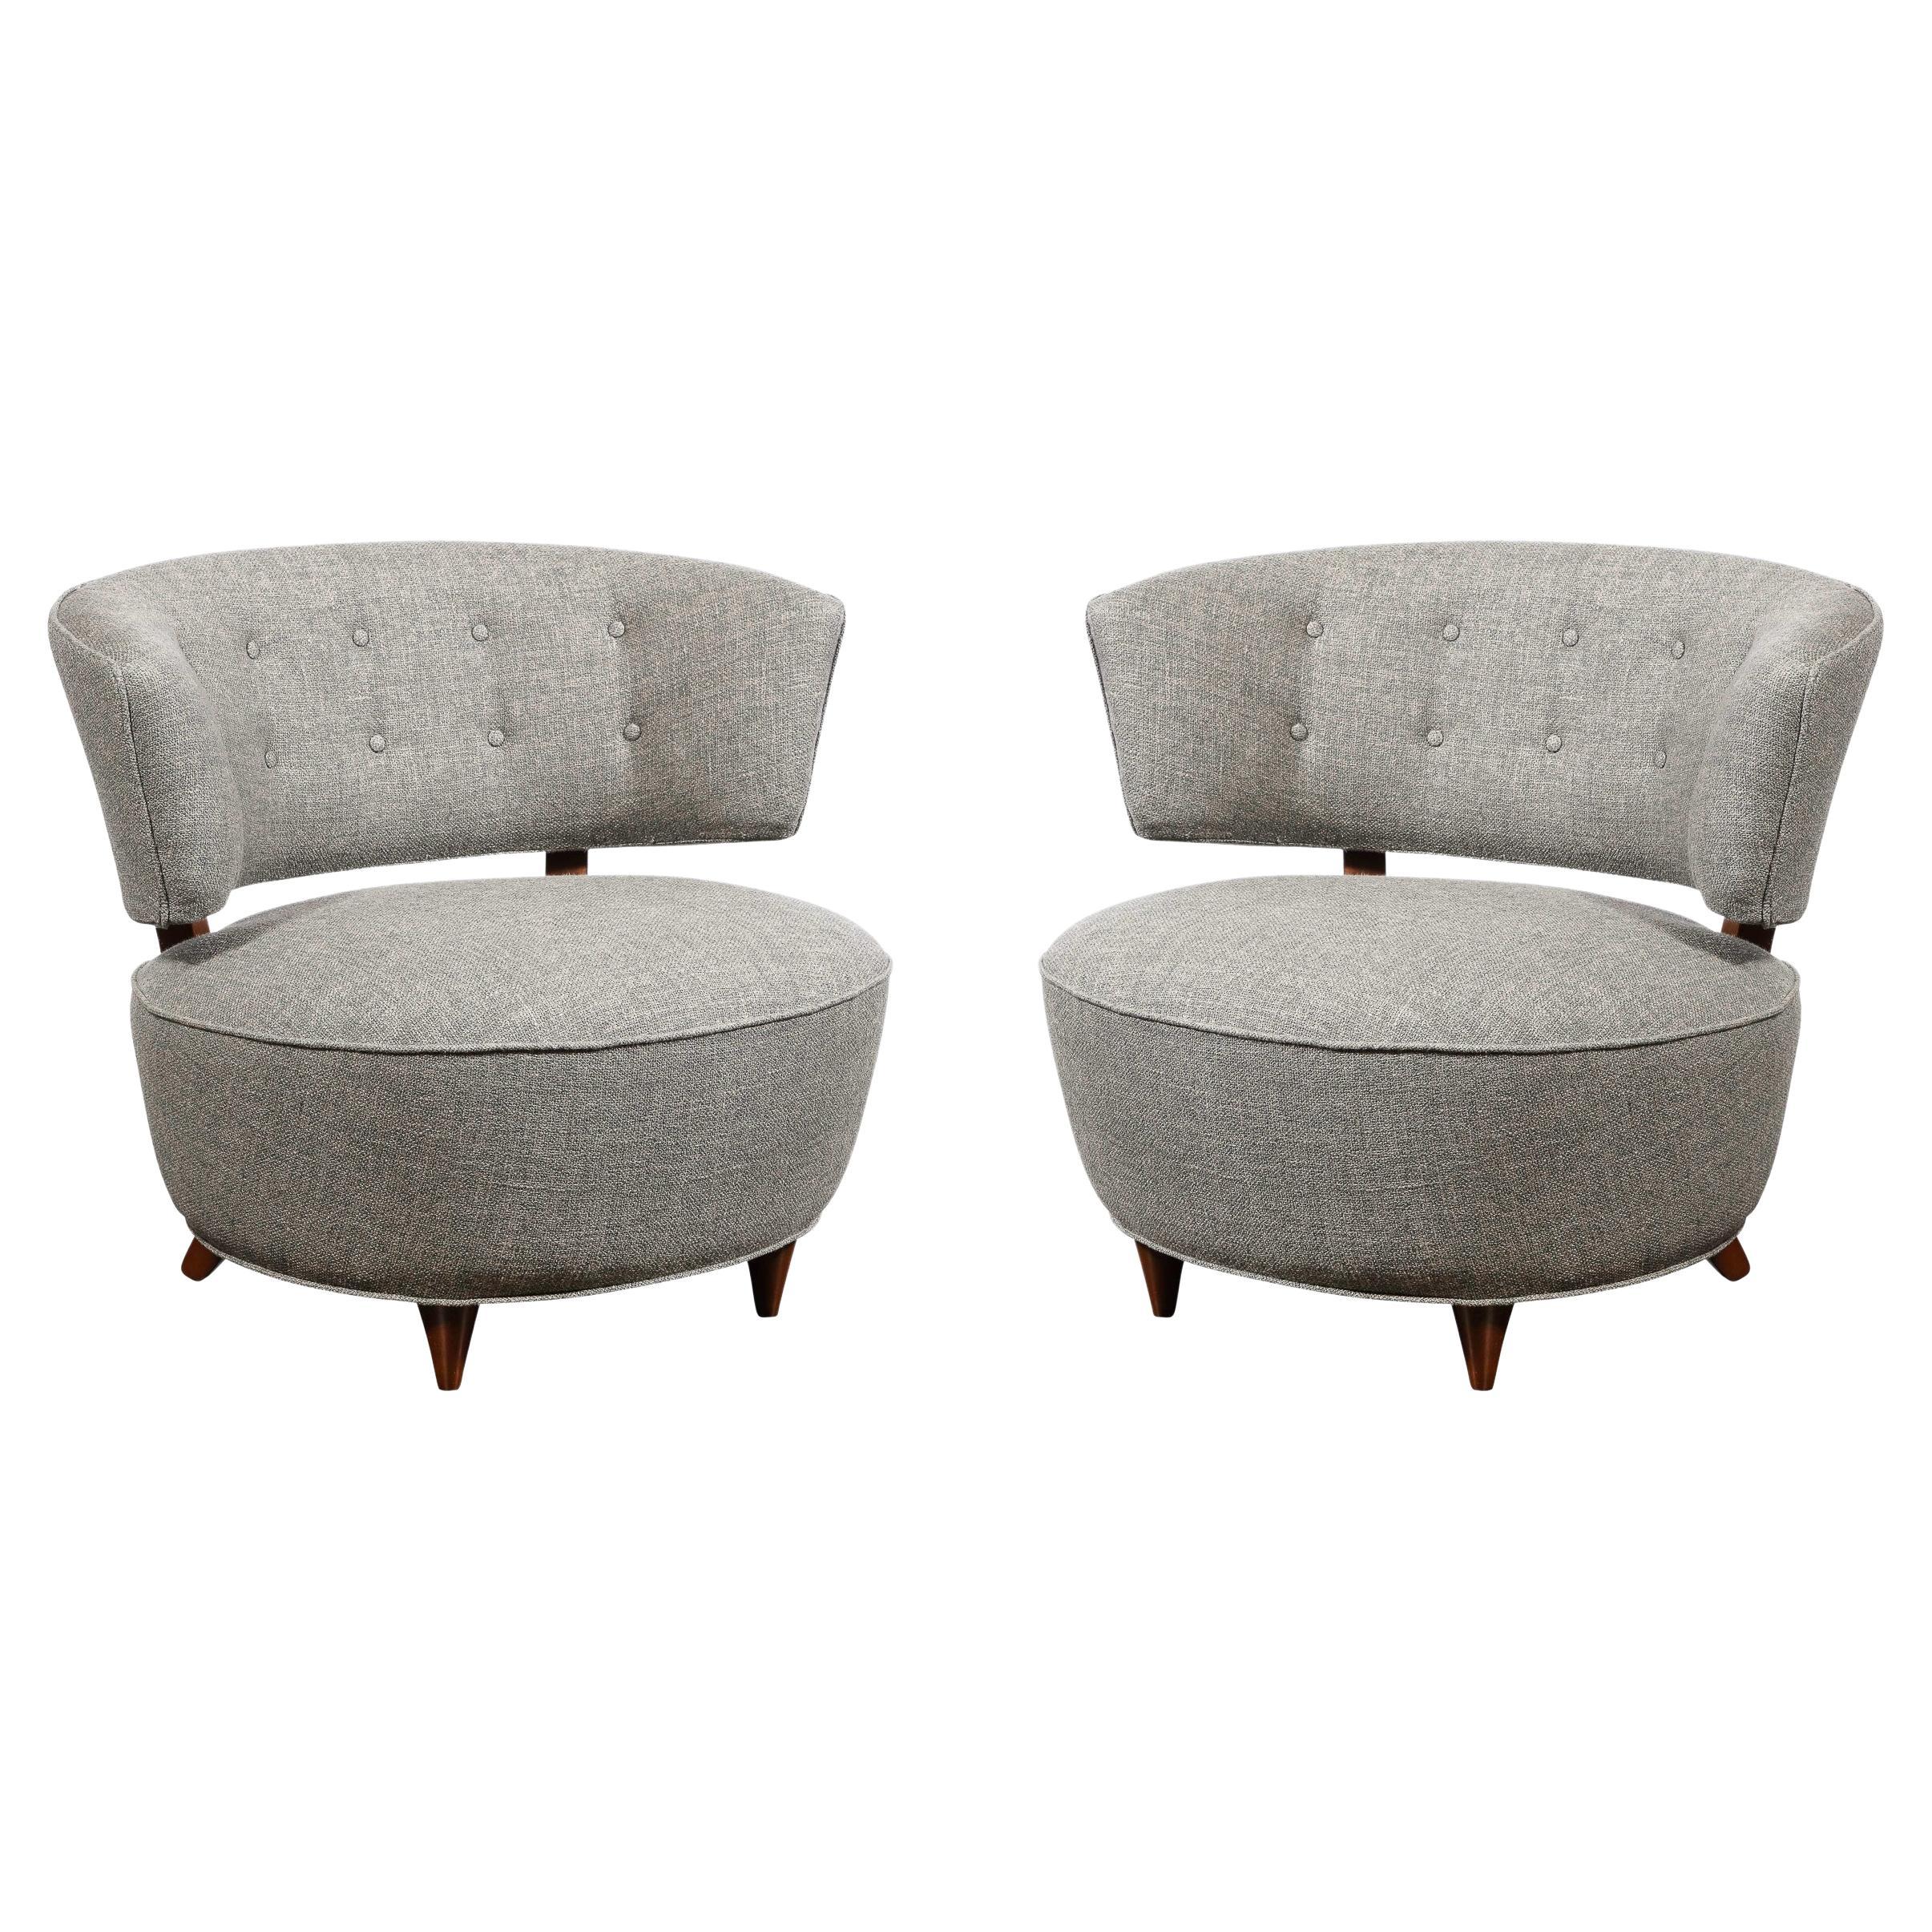 Pair of Art Deco Walnut & Holly Hunt Upholstery Lounge Chairs by Gilbert Rohde